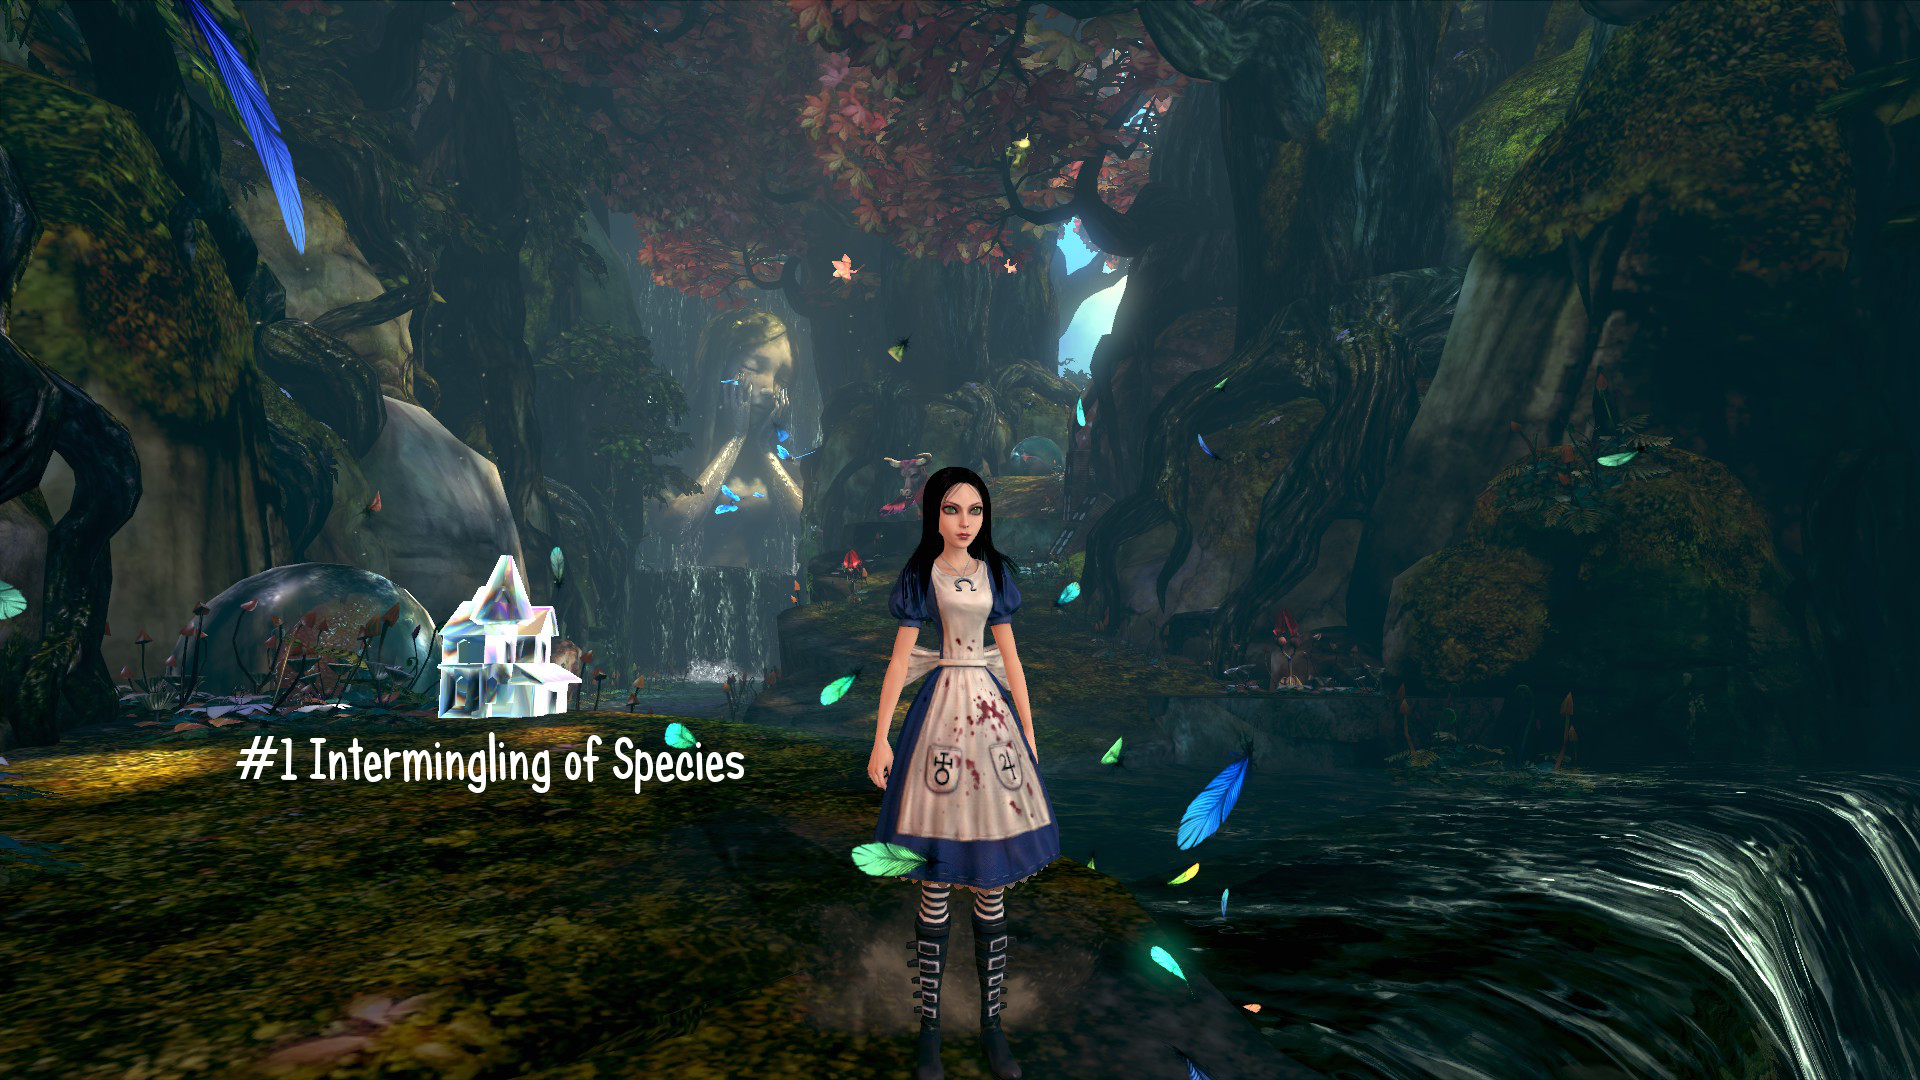 Guide for Alice: Madness Returns - Chapter 1: Hatter's Domain